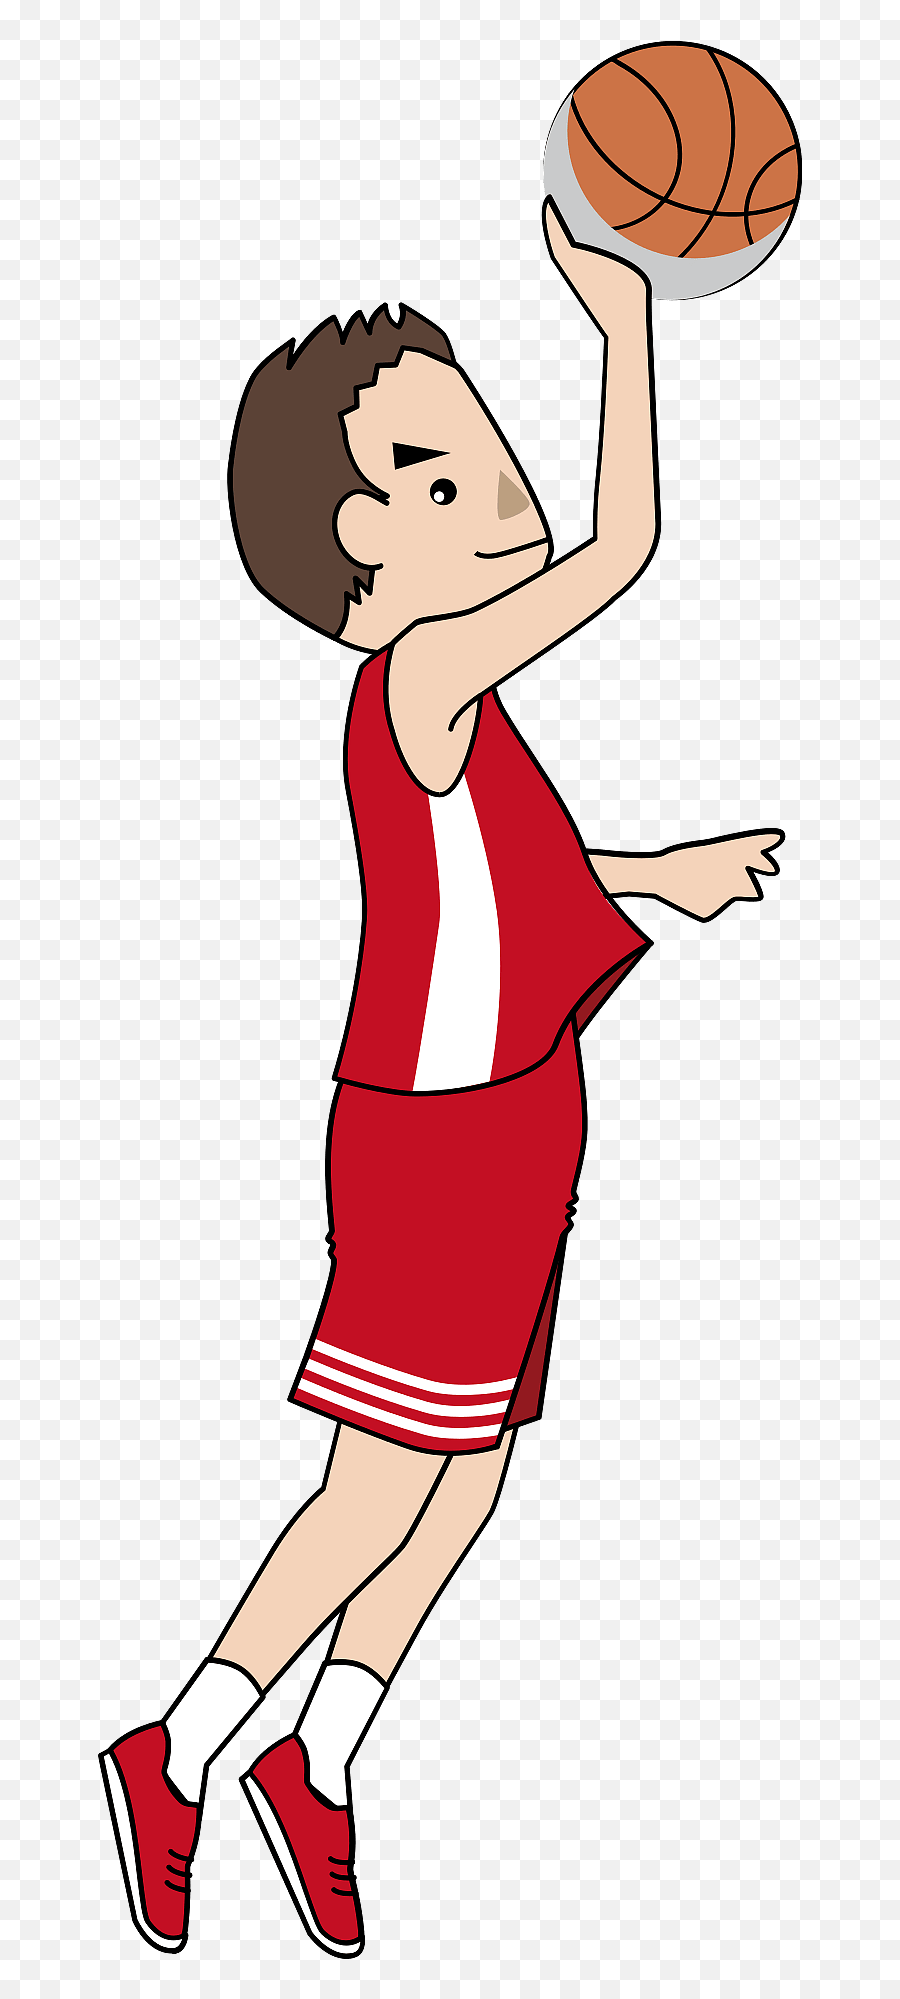 Basketball Player Is Jumping Clipart Free Download Emoji,Basketballs Clipart